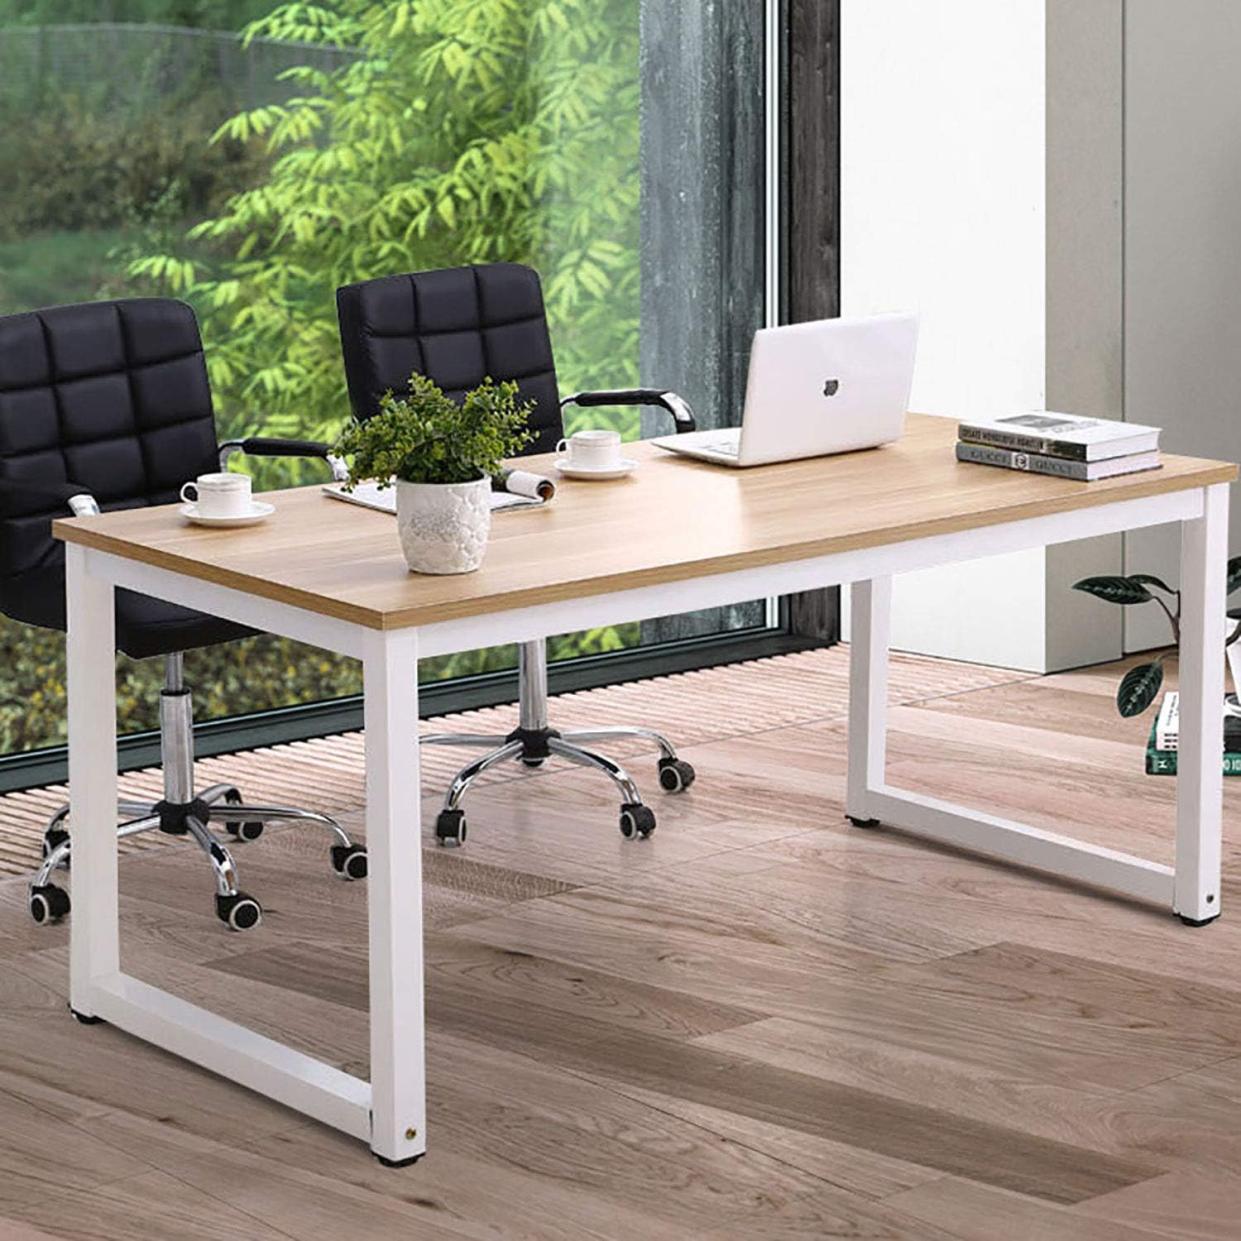 Where Can I Find More Information About Standing Desks?